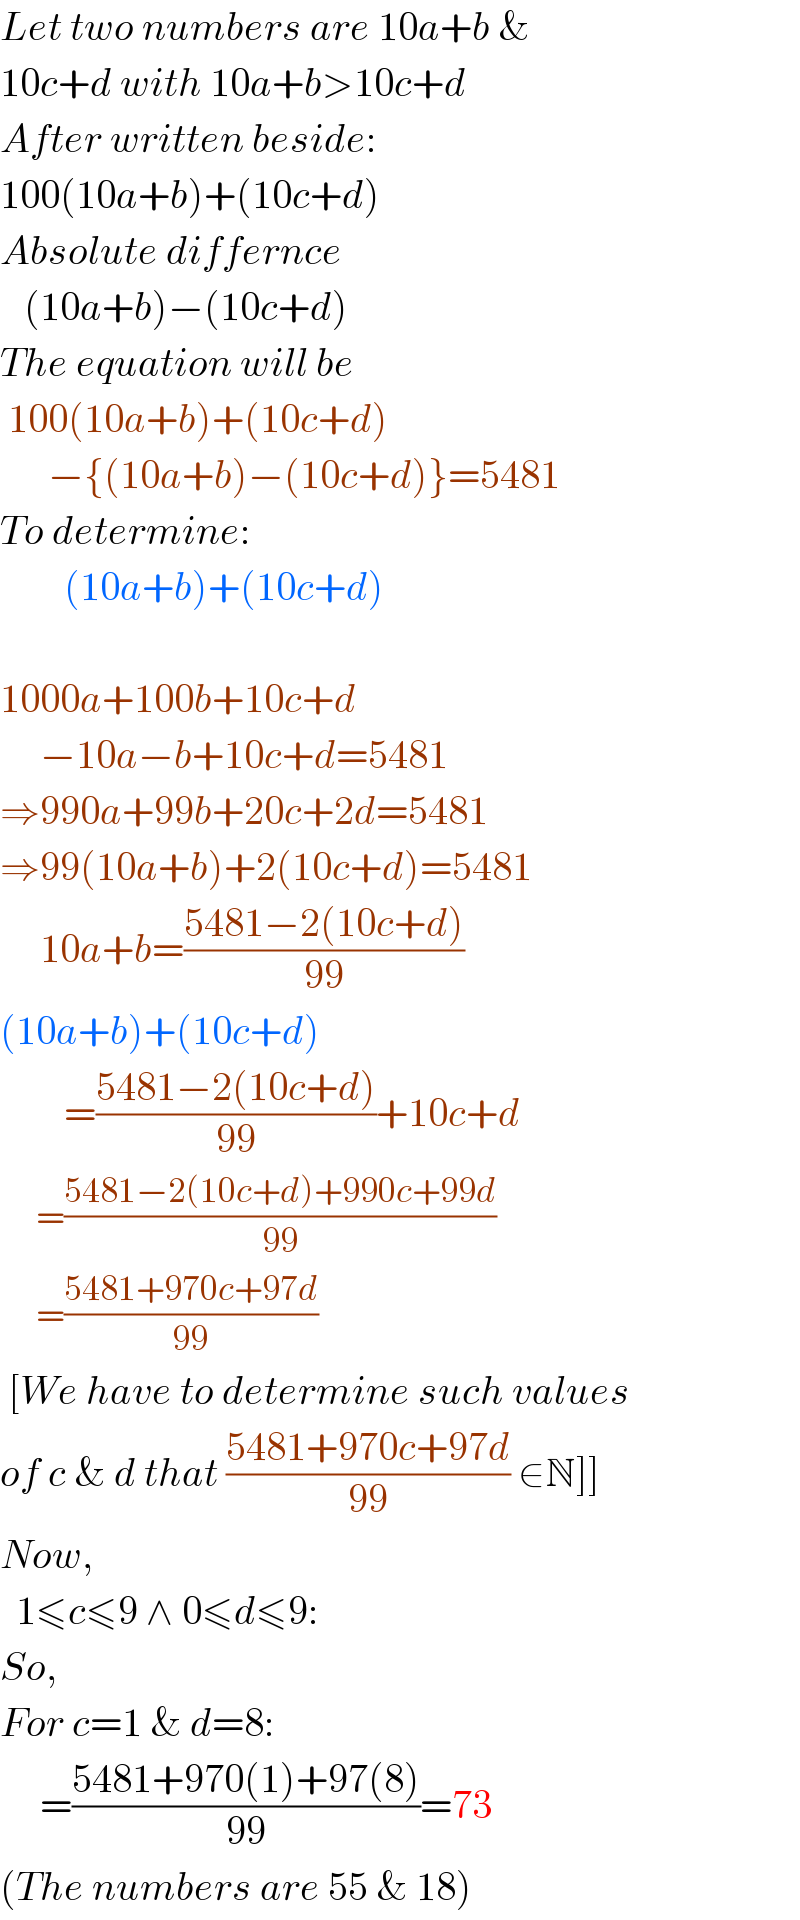 Let two numbers are 10a+b &  10c+d with 10a+b>10c+d  After written beside:  100(10a+b)+(10c+d)  Absolute differnce     (10a+b)−(10c+d)  The equation will be   100(10a+b)+(10c+d)        −{(10a+b)−(10c+d)}=5481  To determine:          (10a+b)+(10c+d)    1000a+100b+10c+d       −10a−b+10c+d=5481  ⇒990a+99b+20c+2d=5481  ⇒99(10a+b)+2(10c+d)=5481       10a+b=((5481−2(10c+d))/(99))  (10a+b)+(10c+d)          =((5481−2(10c+d))/(99))+10c+d          =((5481−2(10c+d)+990c+99d)/(99))          =((5481+970c+97d)/(99))     [We have to determine such values  of c & d that ((5481+970c+97d)/(99)) ∈N]]  Now,    1≤c≤9 ∧ 0≤d≤9:  So,  For c=1 & d=8:       =((5481+970(1)+97(8))/(99))=73  (The numbers are 55 & 18)  